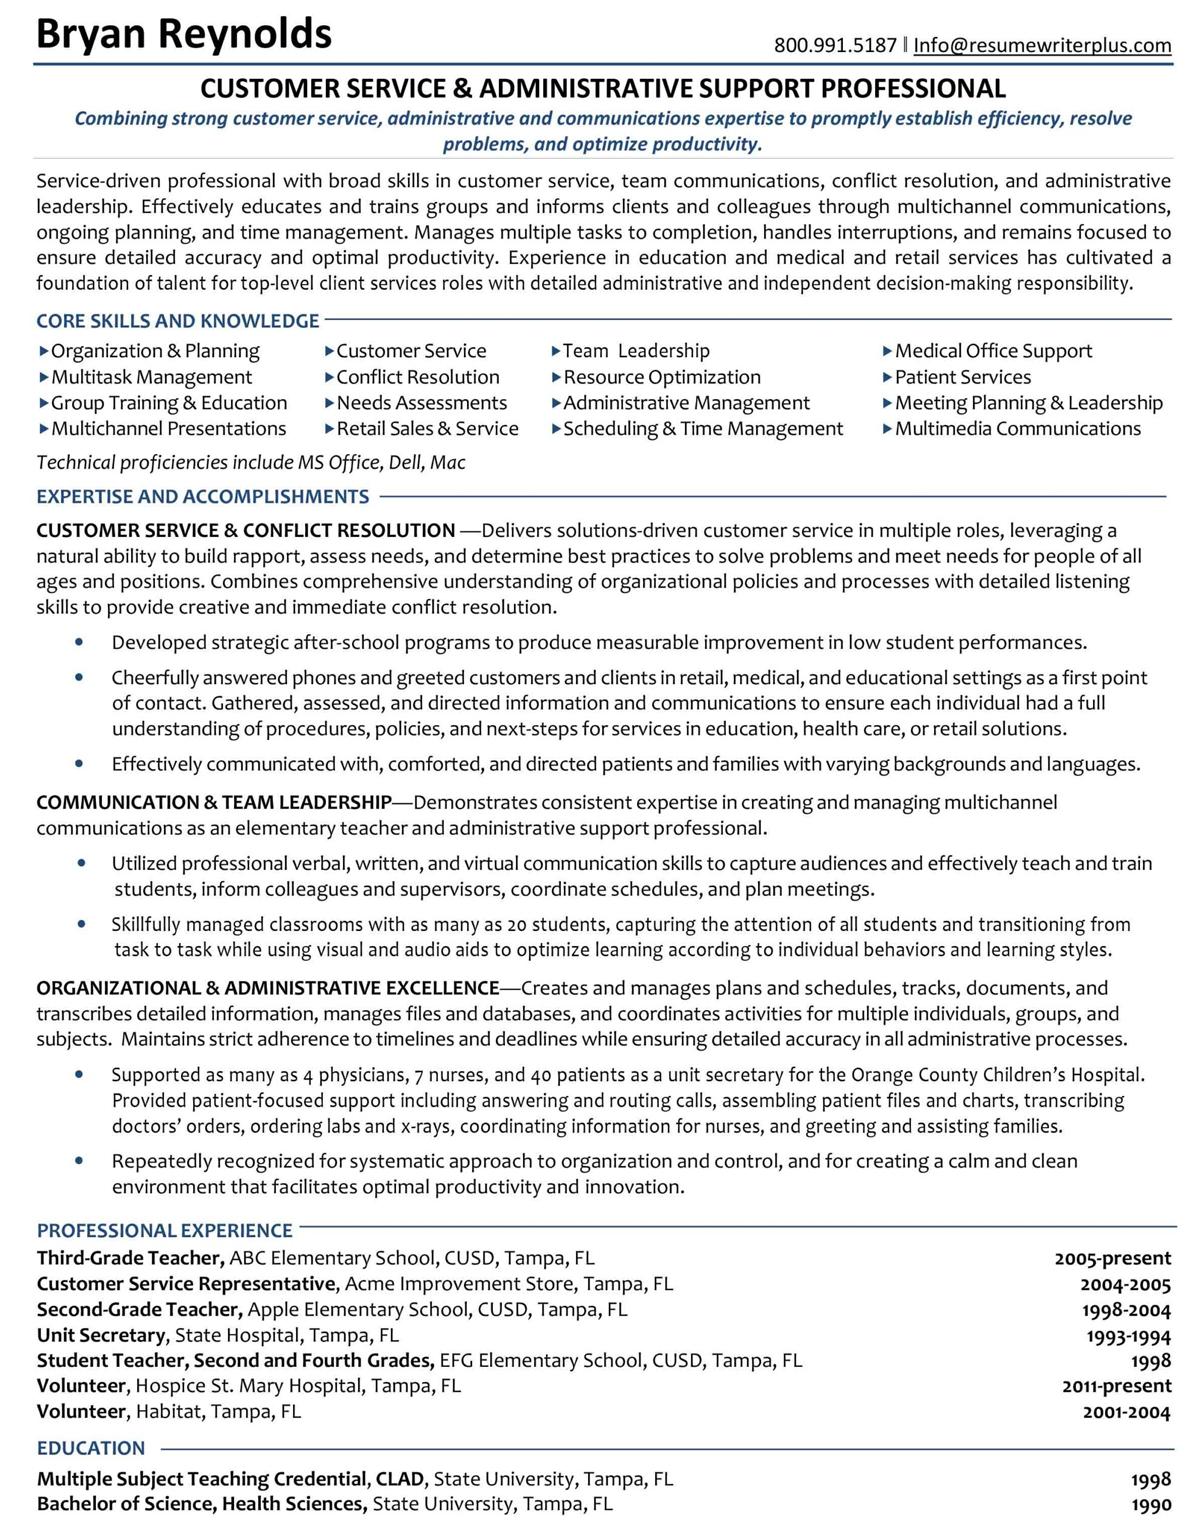 Customer-Service-and-Administrative-Support-Professional-Resume